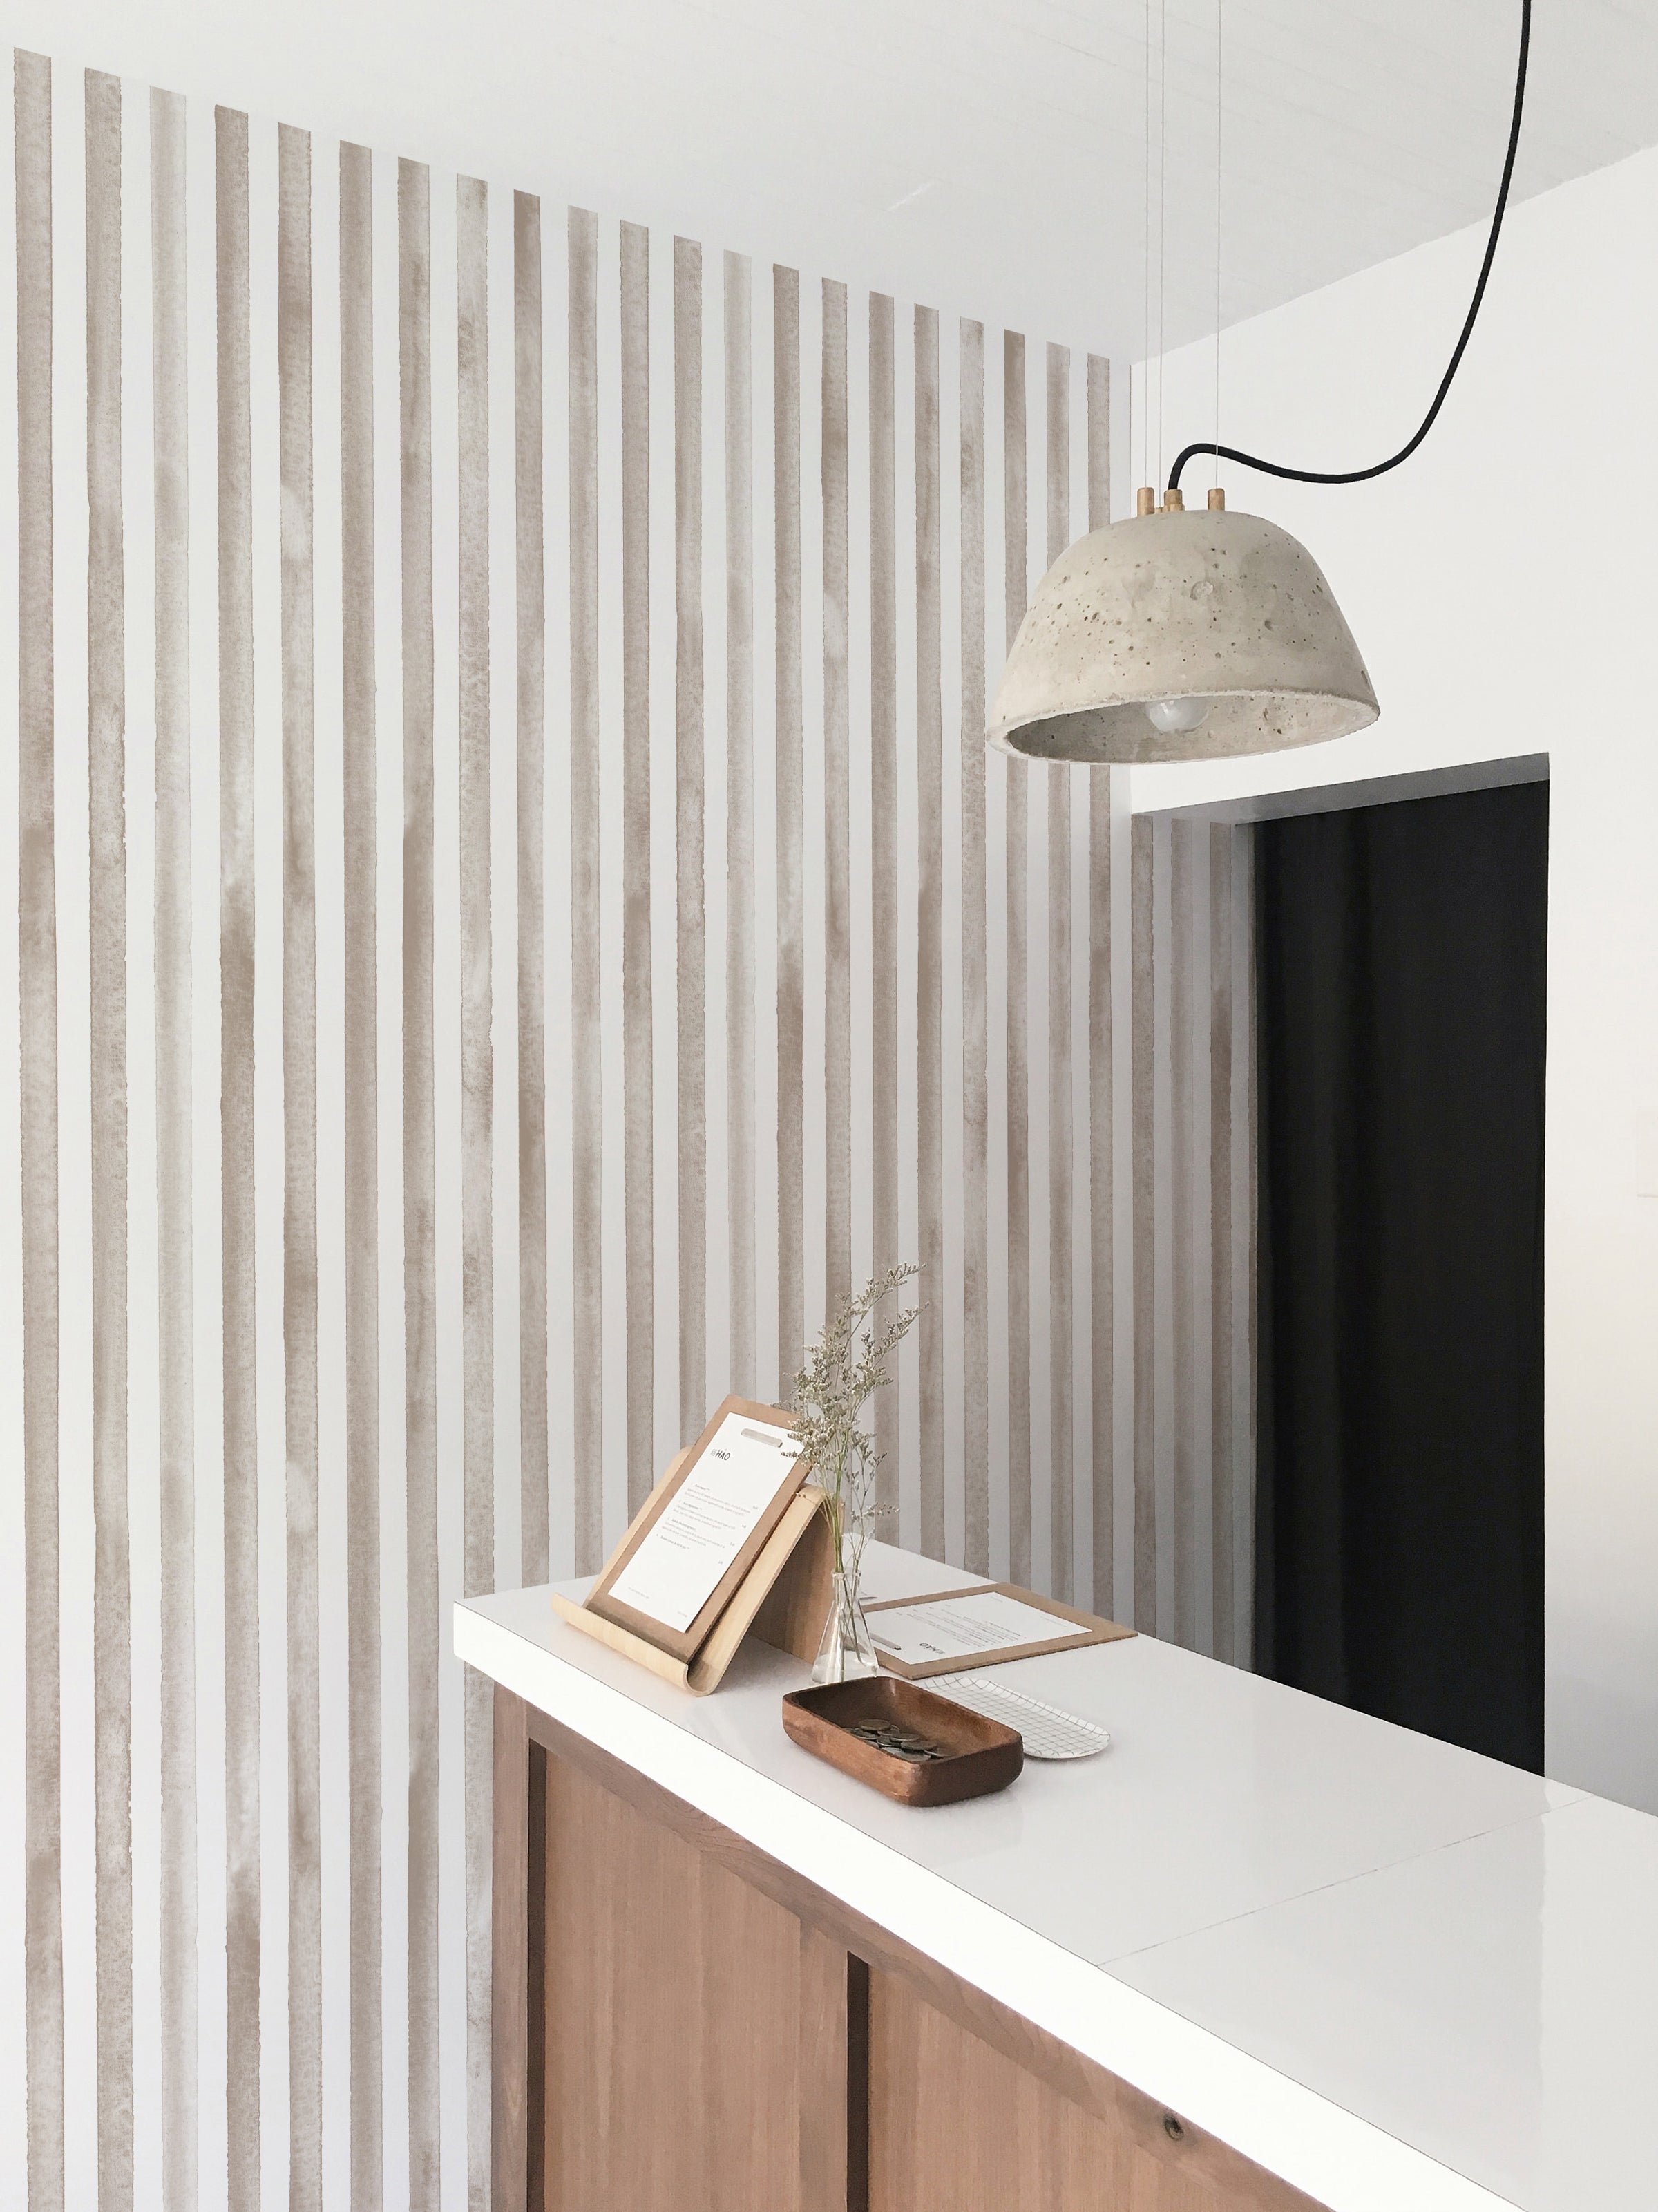 A stylish home office setup with a white countertop against a background of vertical watercolour stripes wallpaper. The decor includes a modern chair, a concrete pendant lamp, and minimalistic accessories, emphasizing a clean and contemporary workspace.